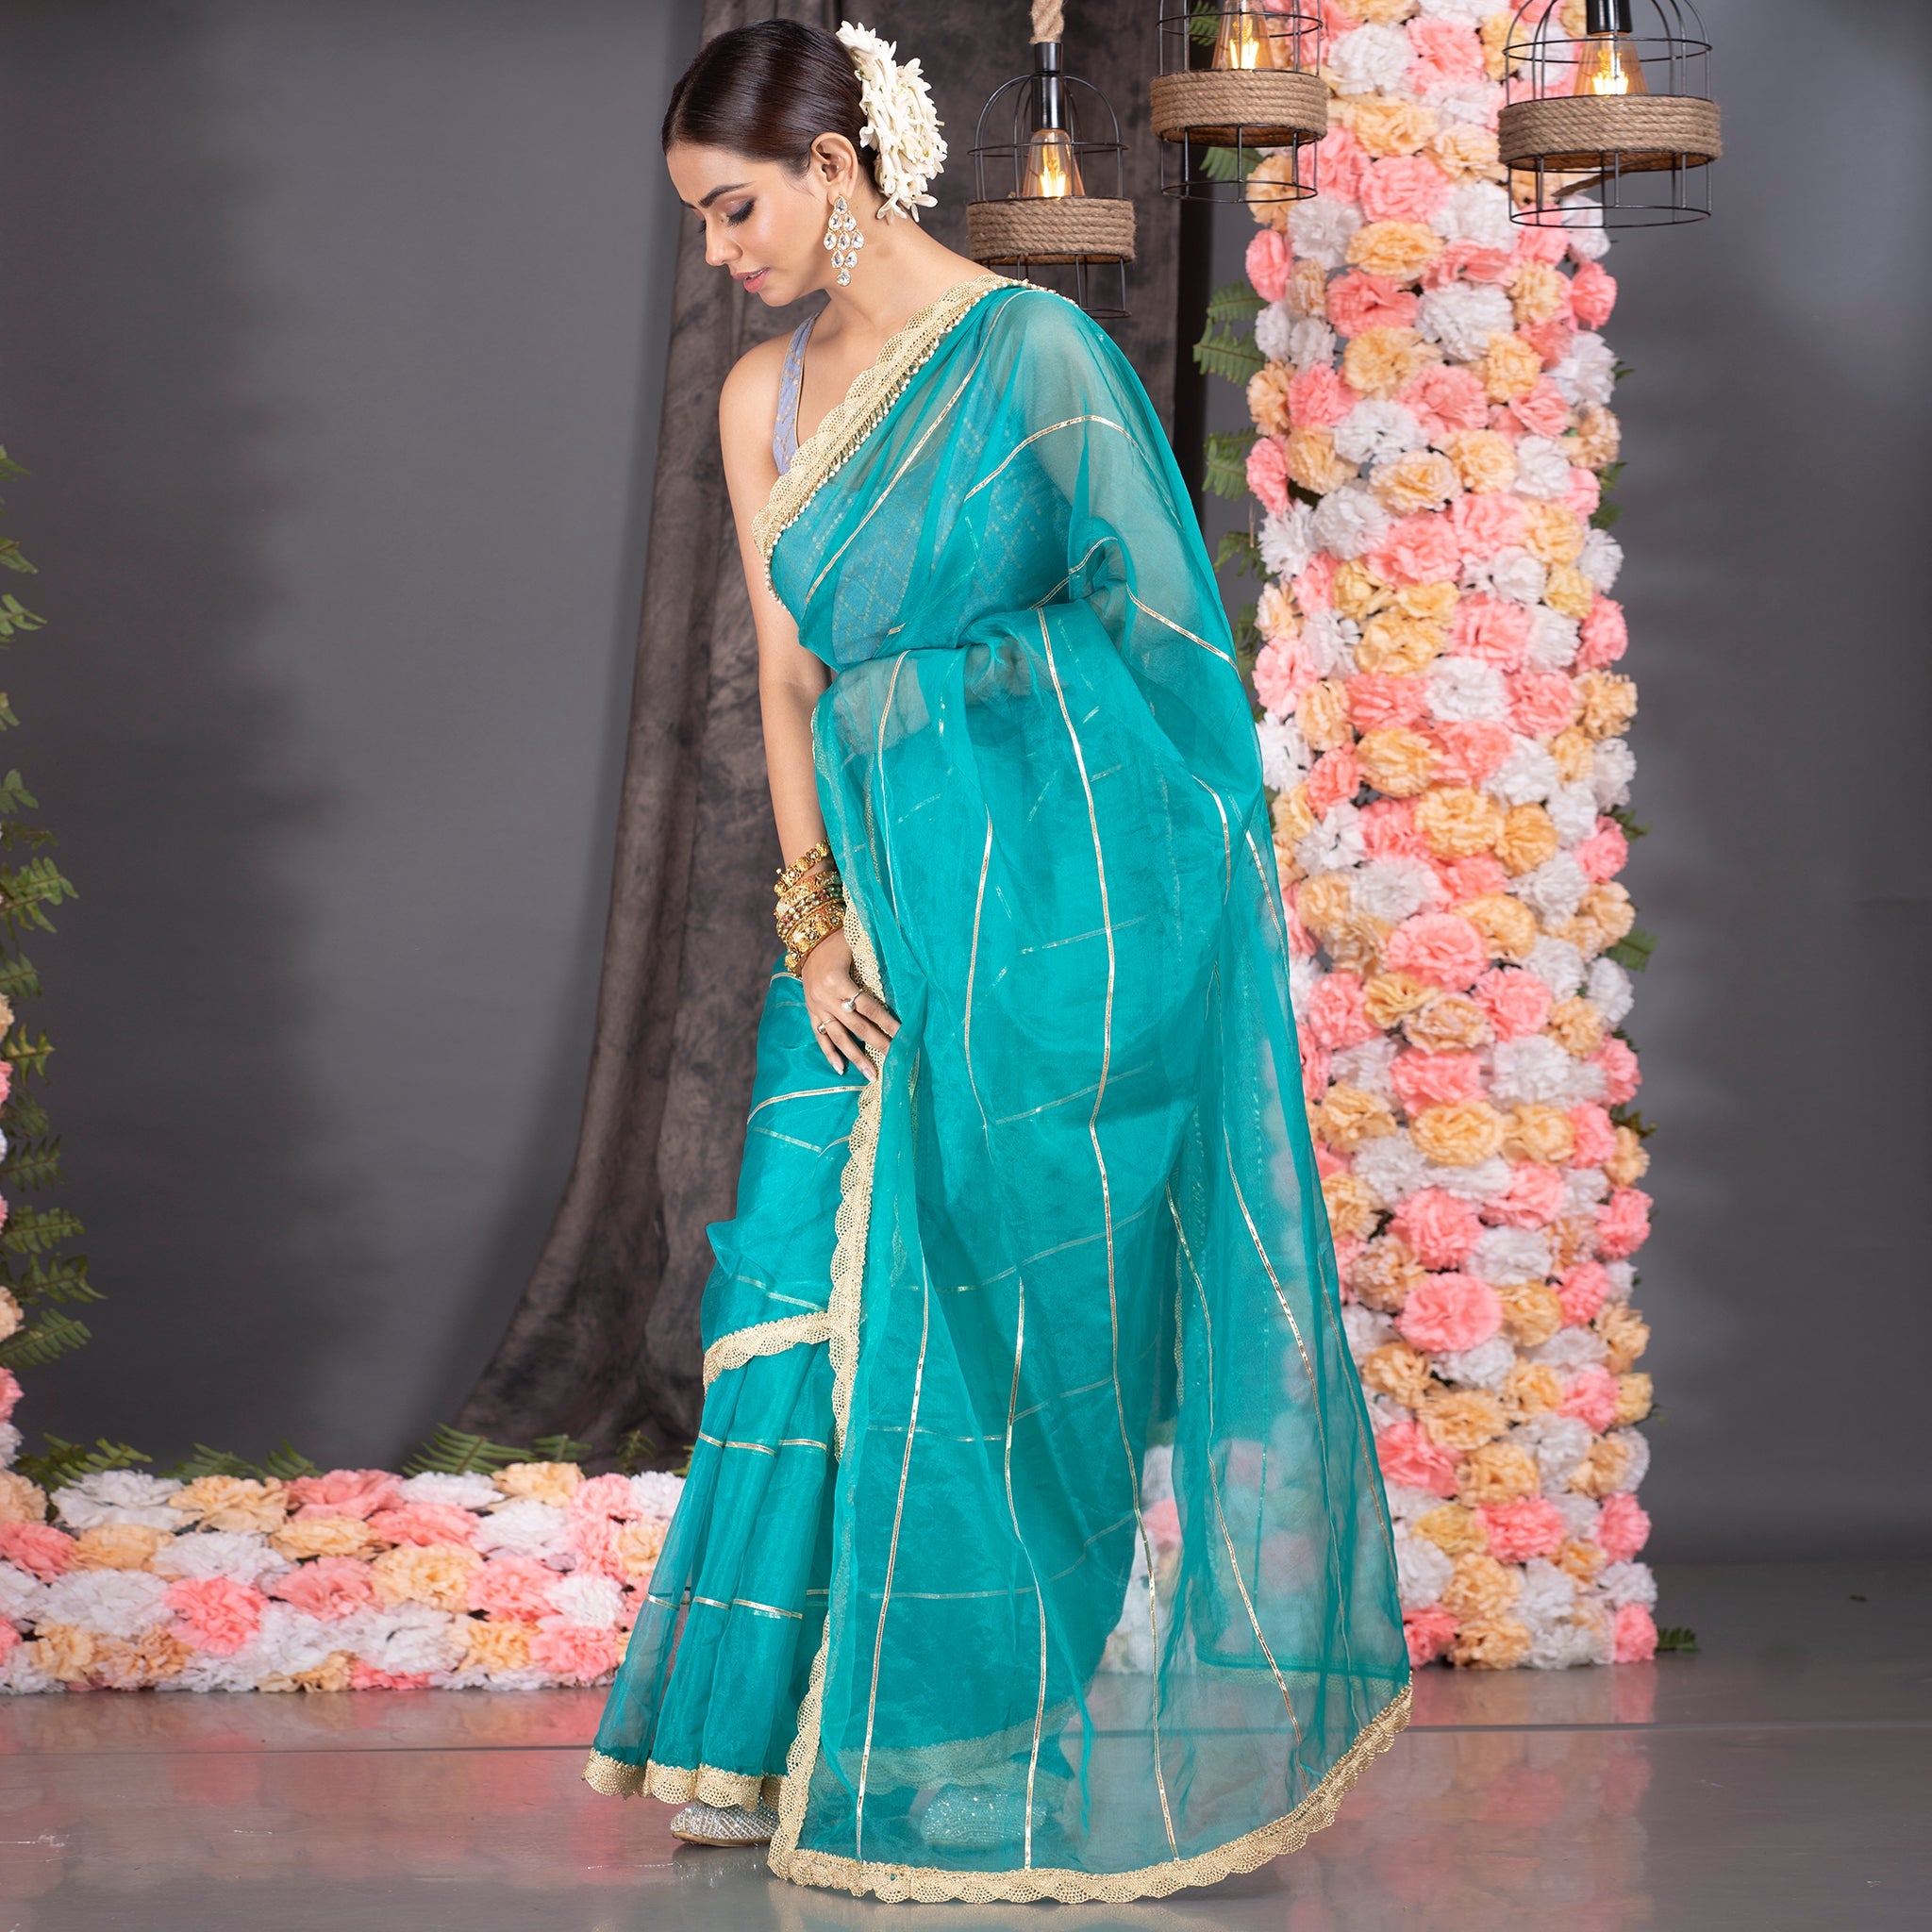 Women's Teal Organza Saree With Gota Work And Scallop Border - Boveee